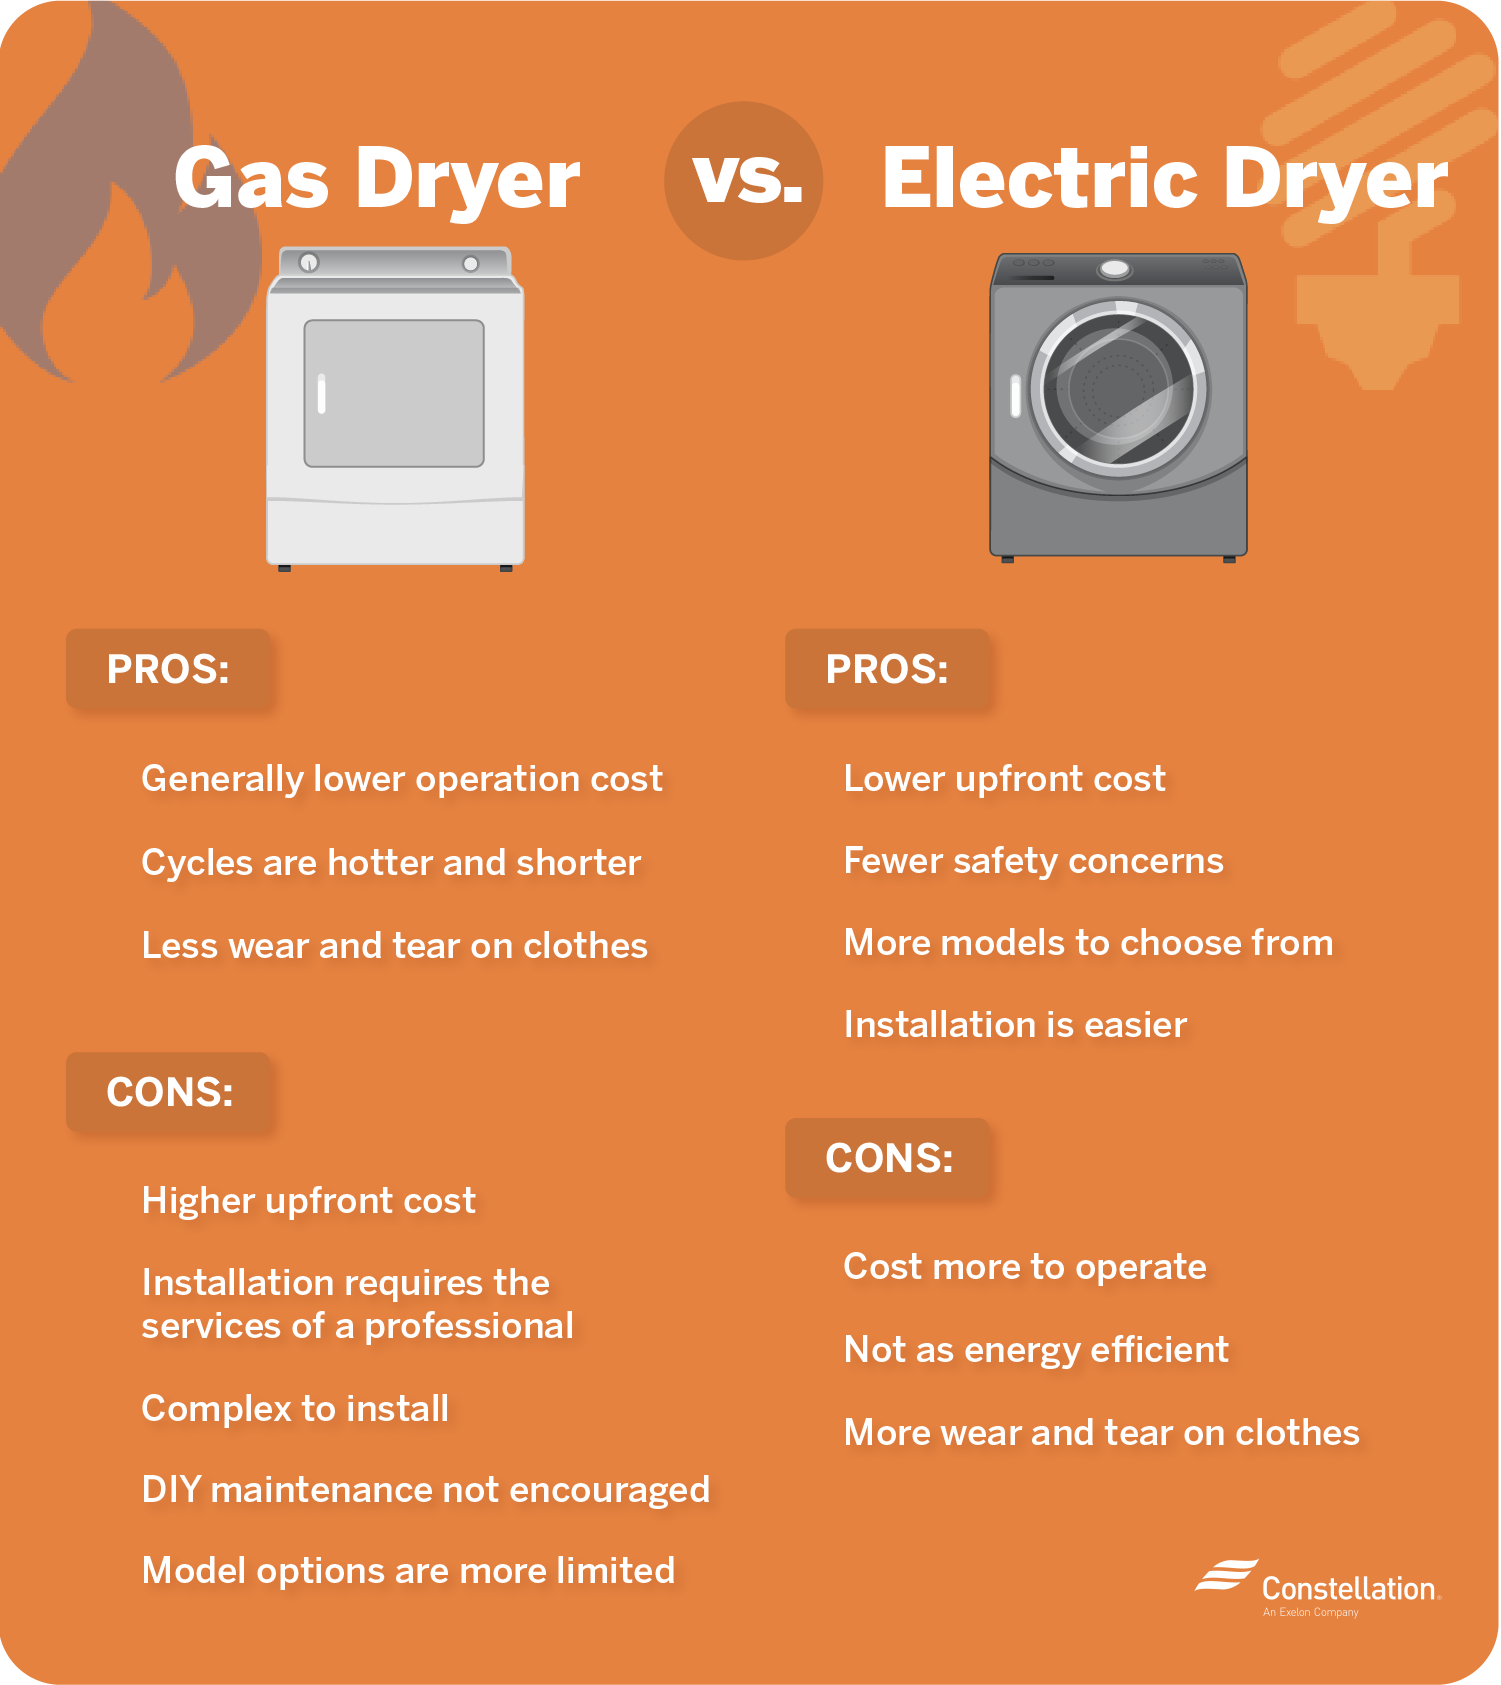 Gas dryer vs electric dryer pros and cons